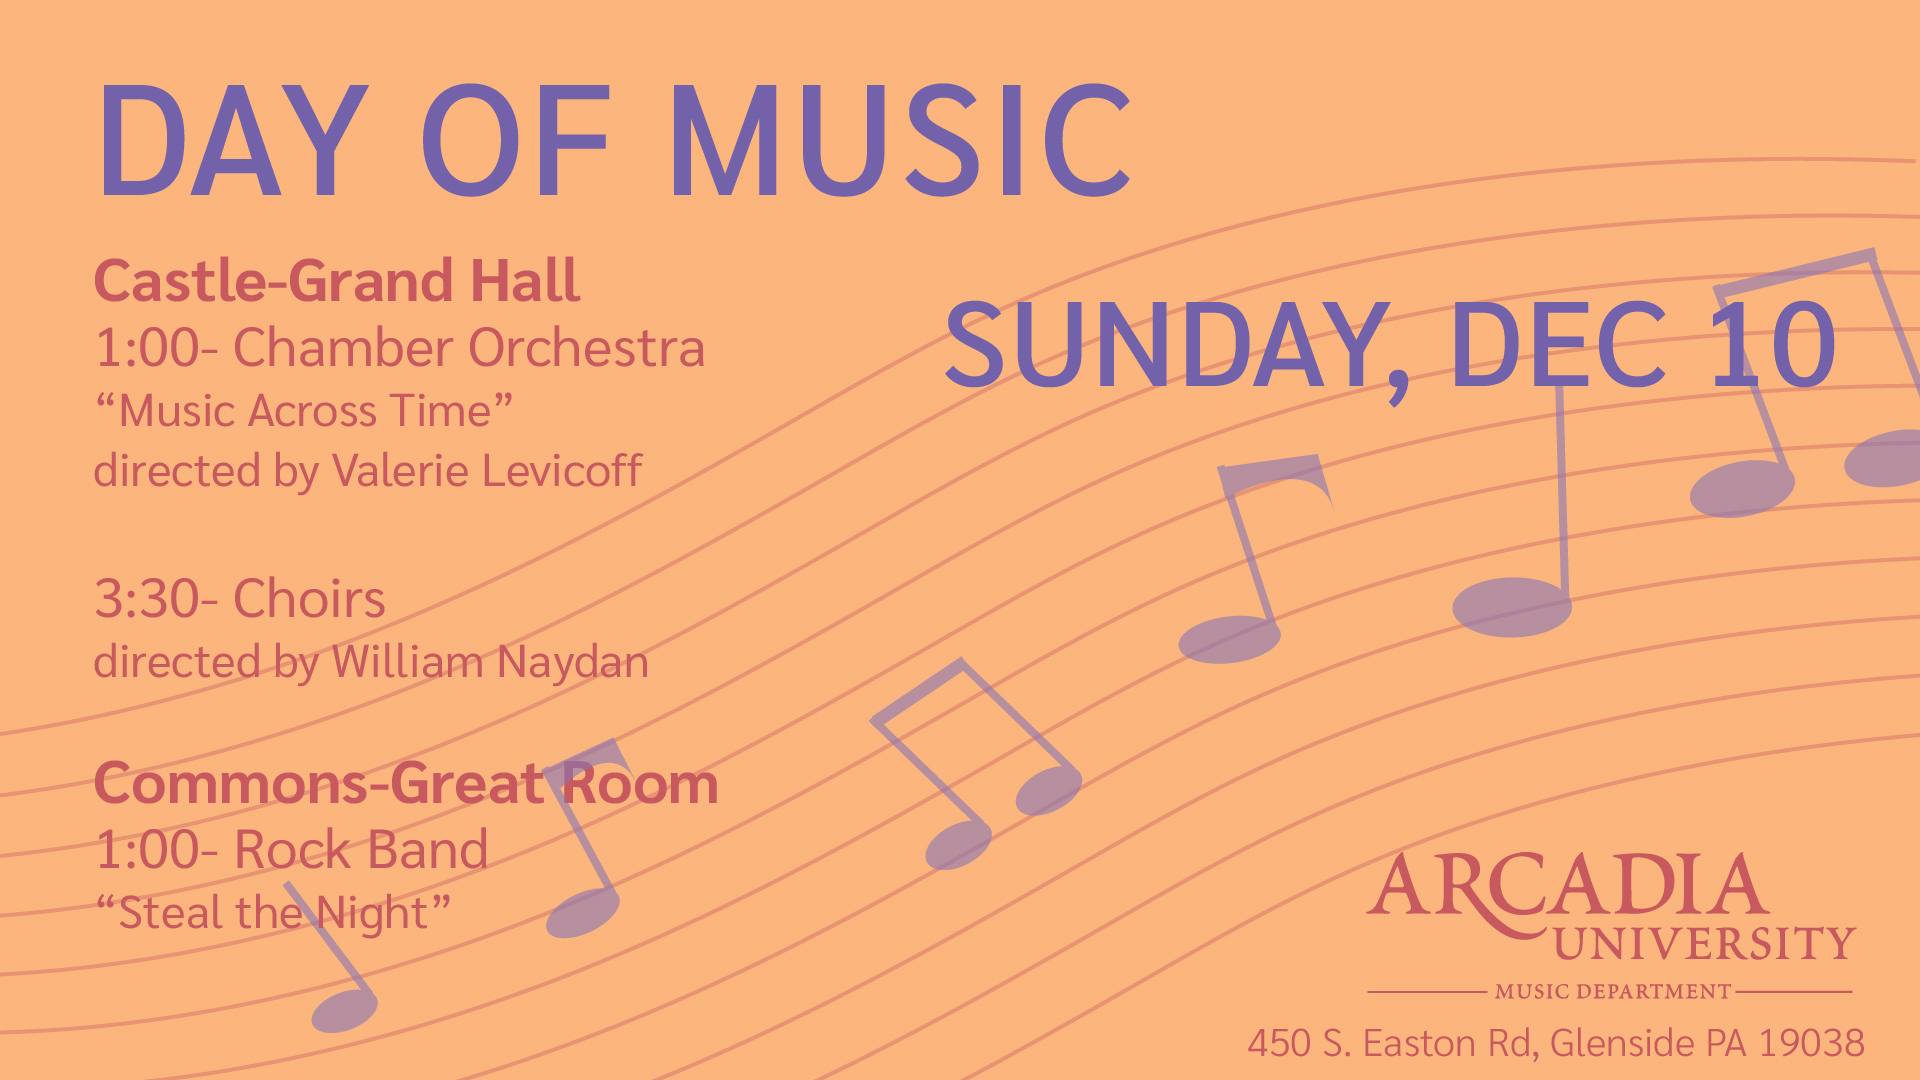 A banner highlighting events at Arcadia University on the Day of Music.